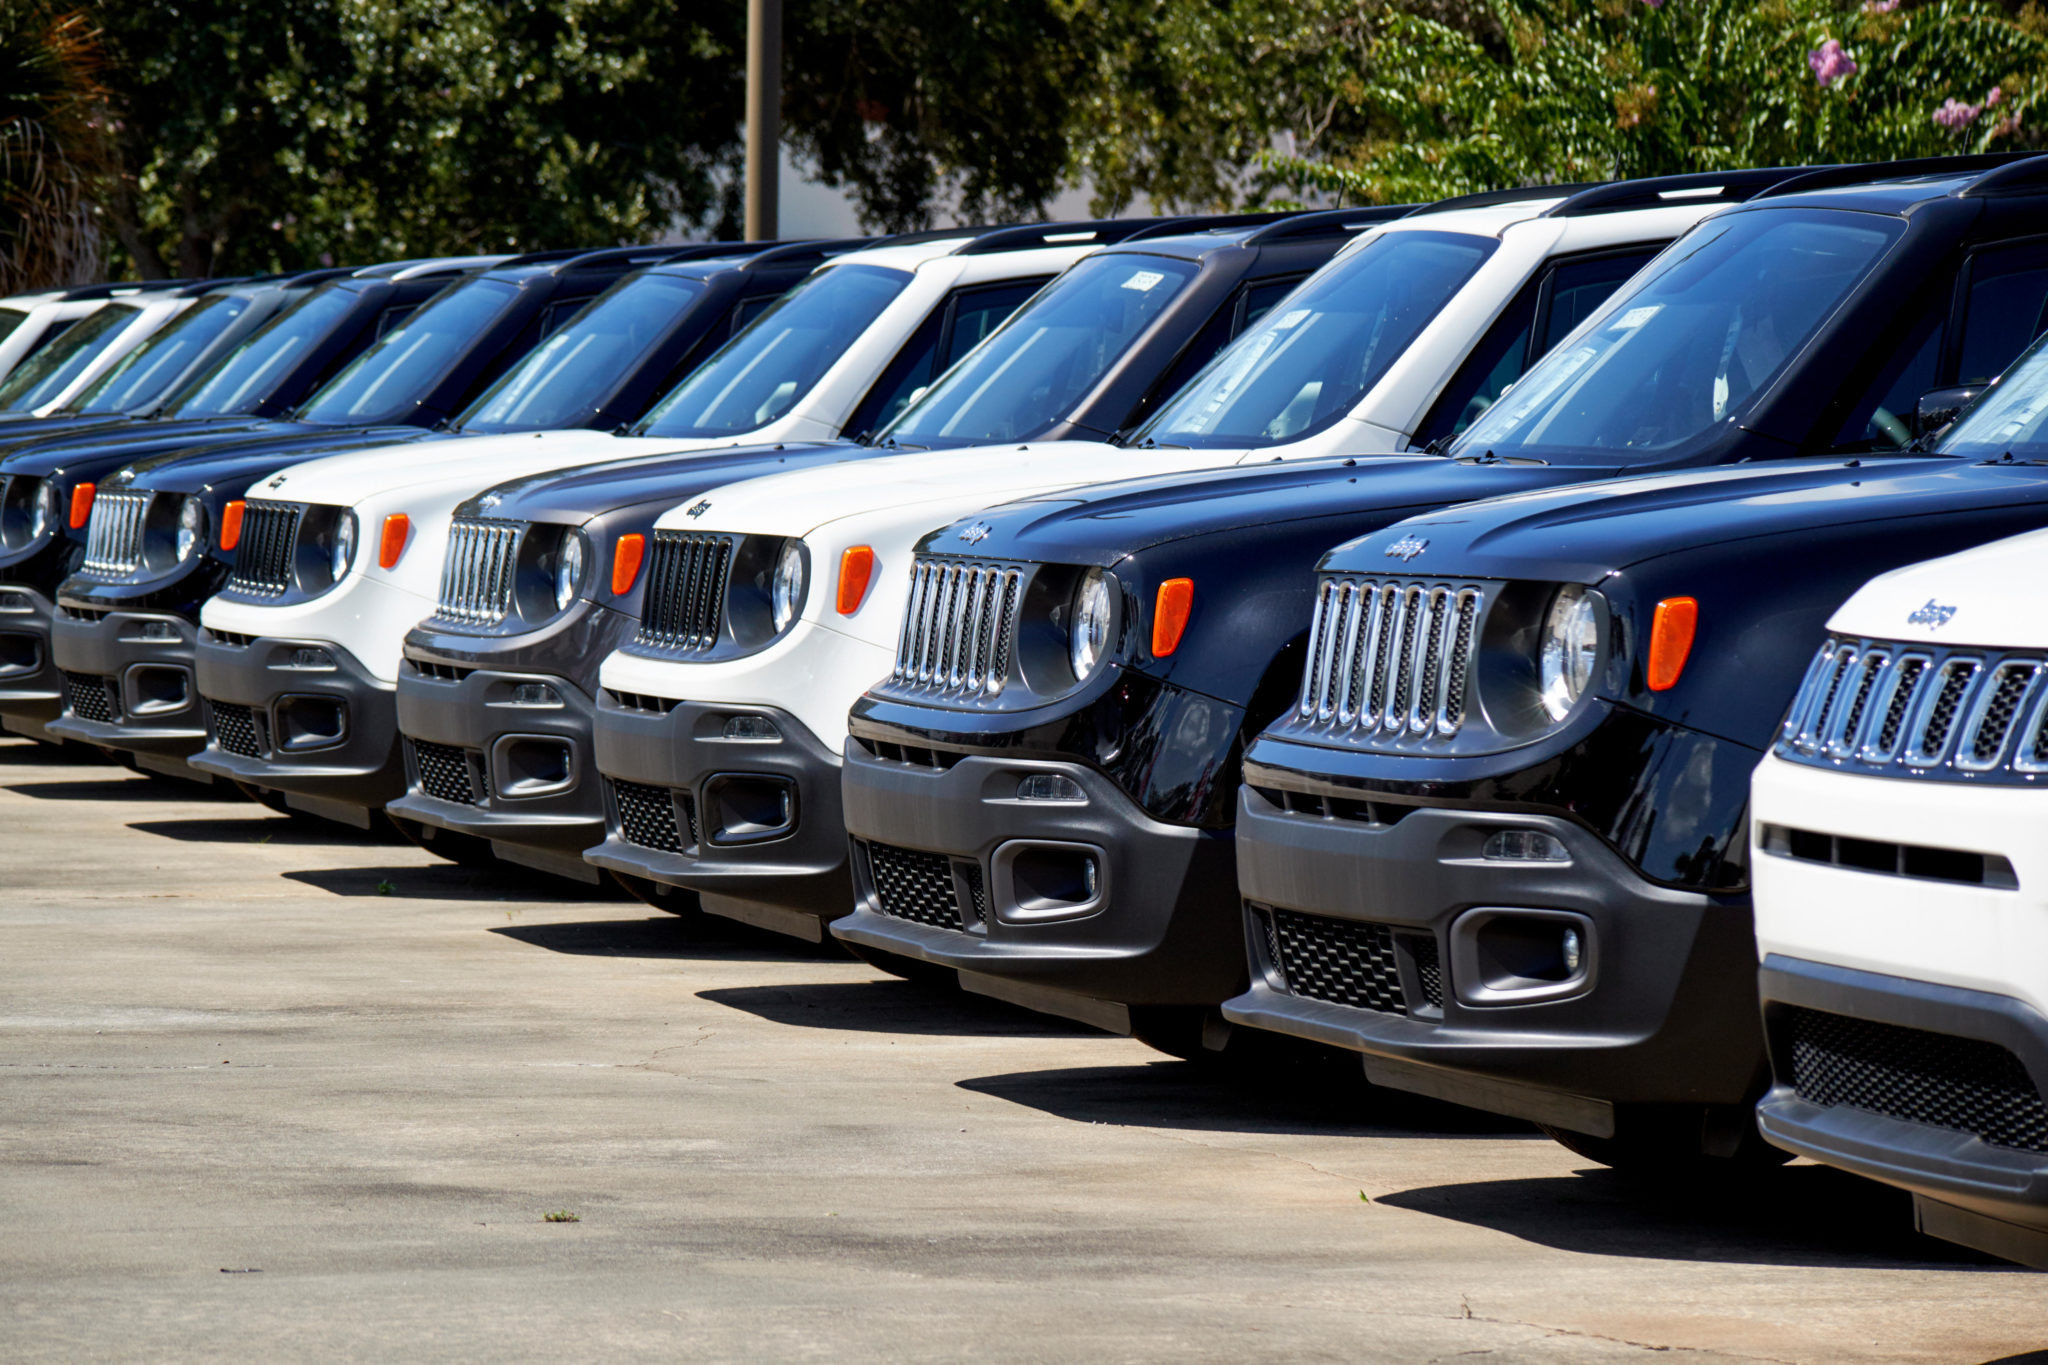 Jeep SUVs are seen on a car sales lot in July 2019